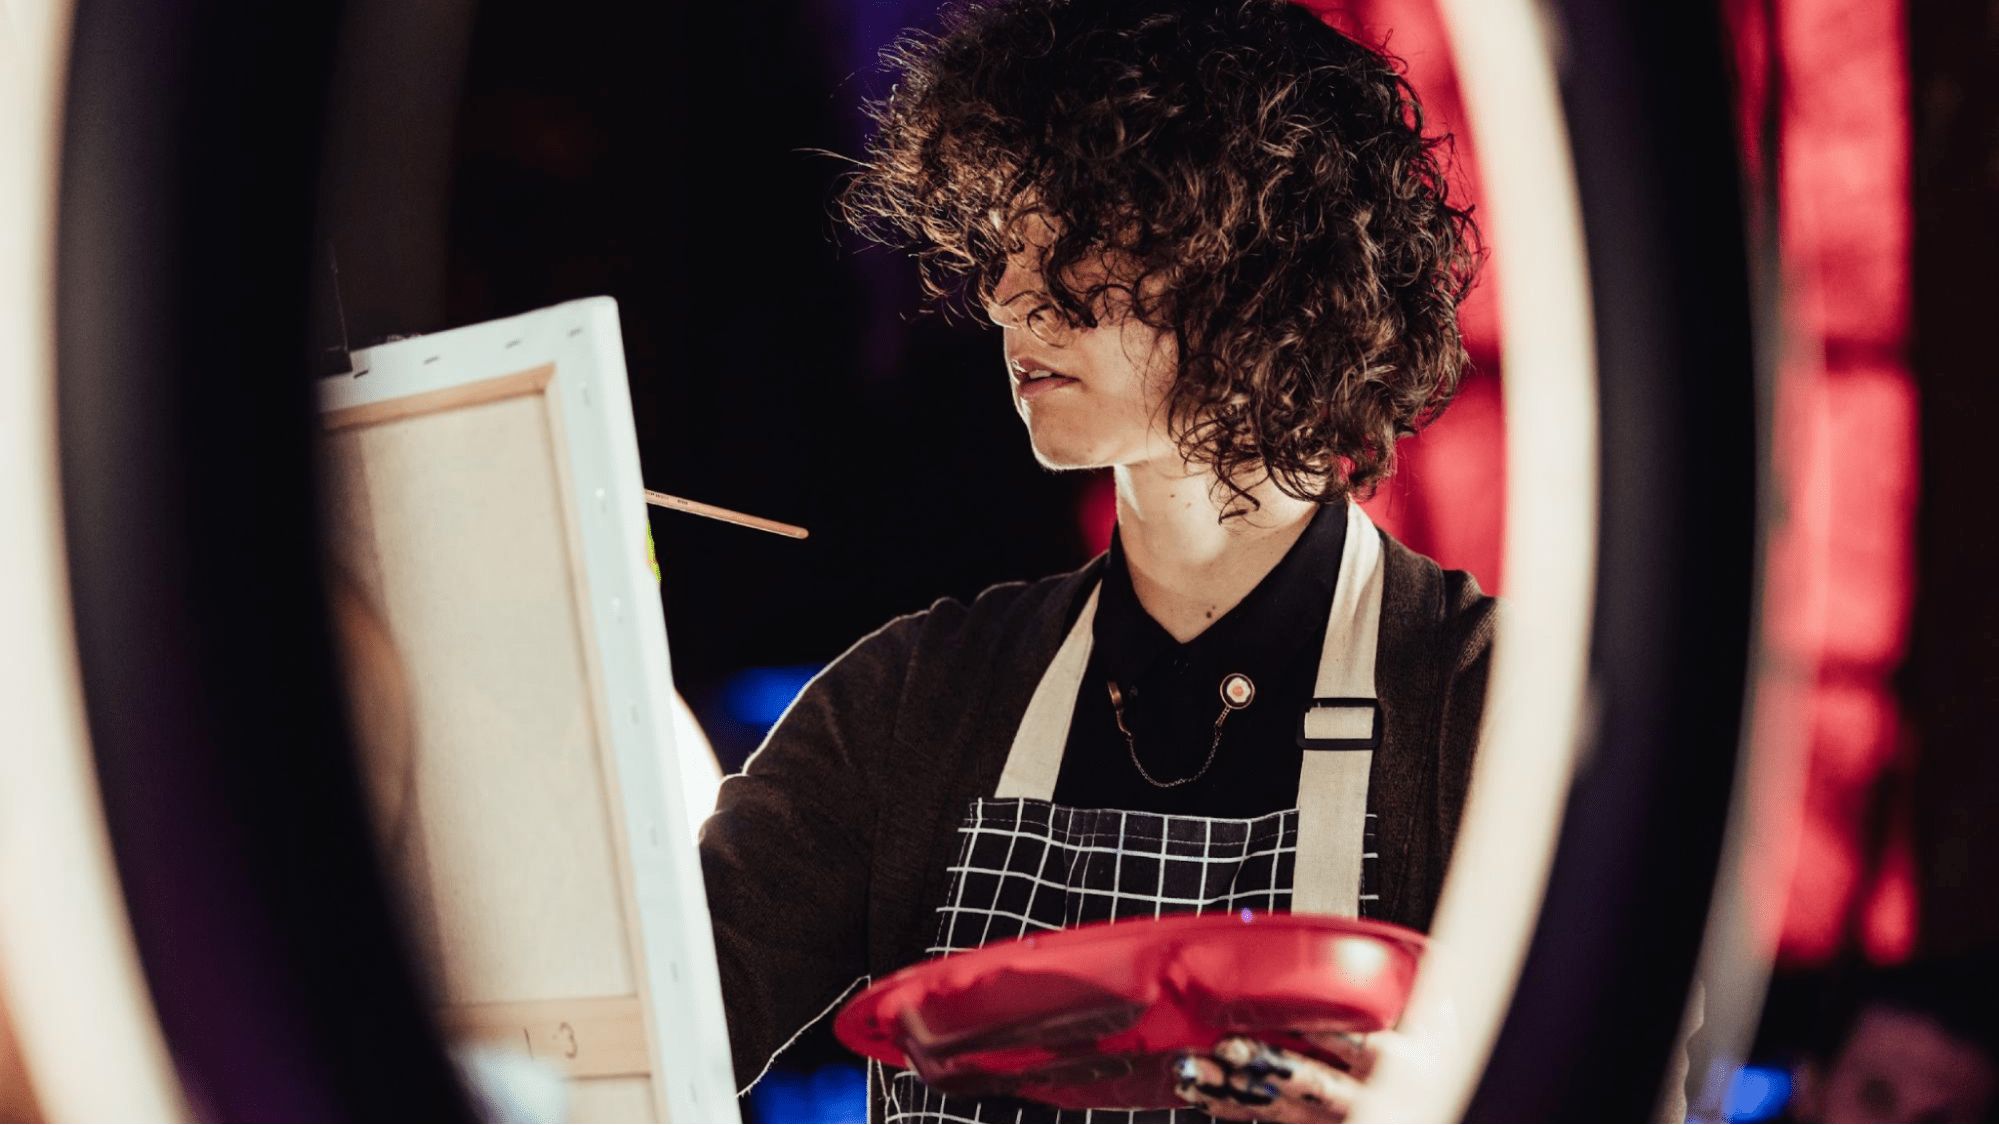 Woman painting on stage